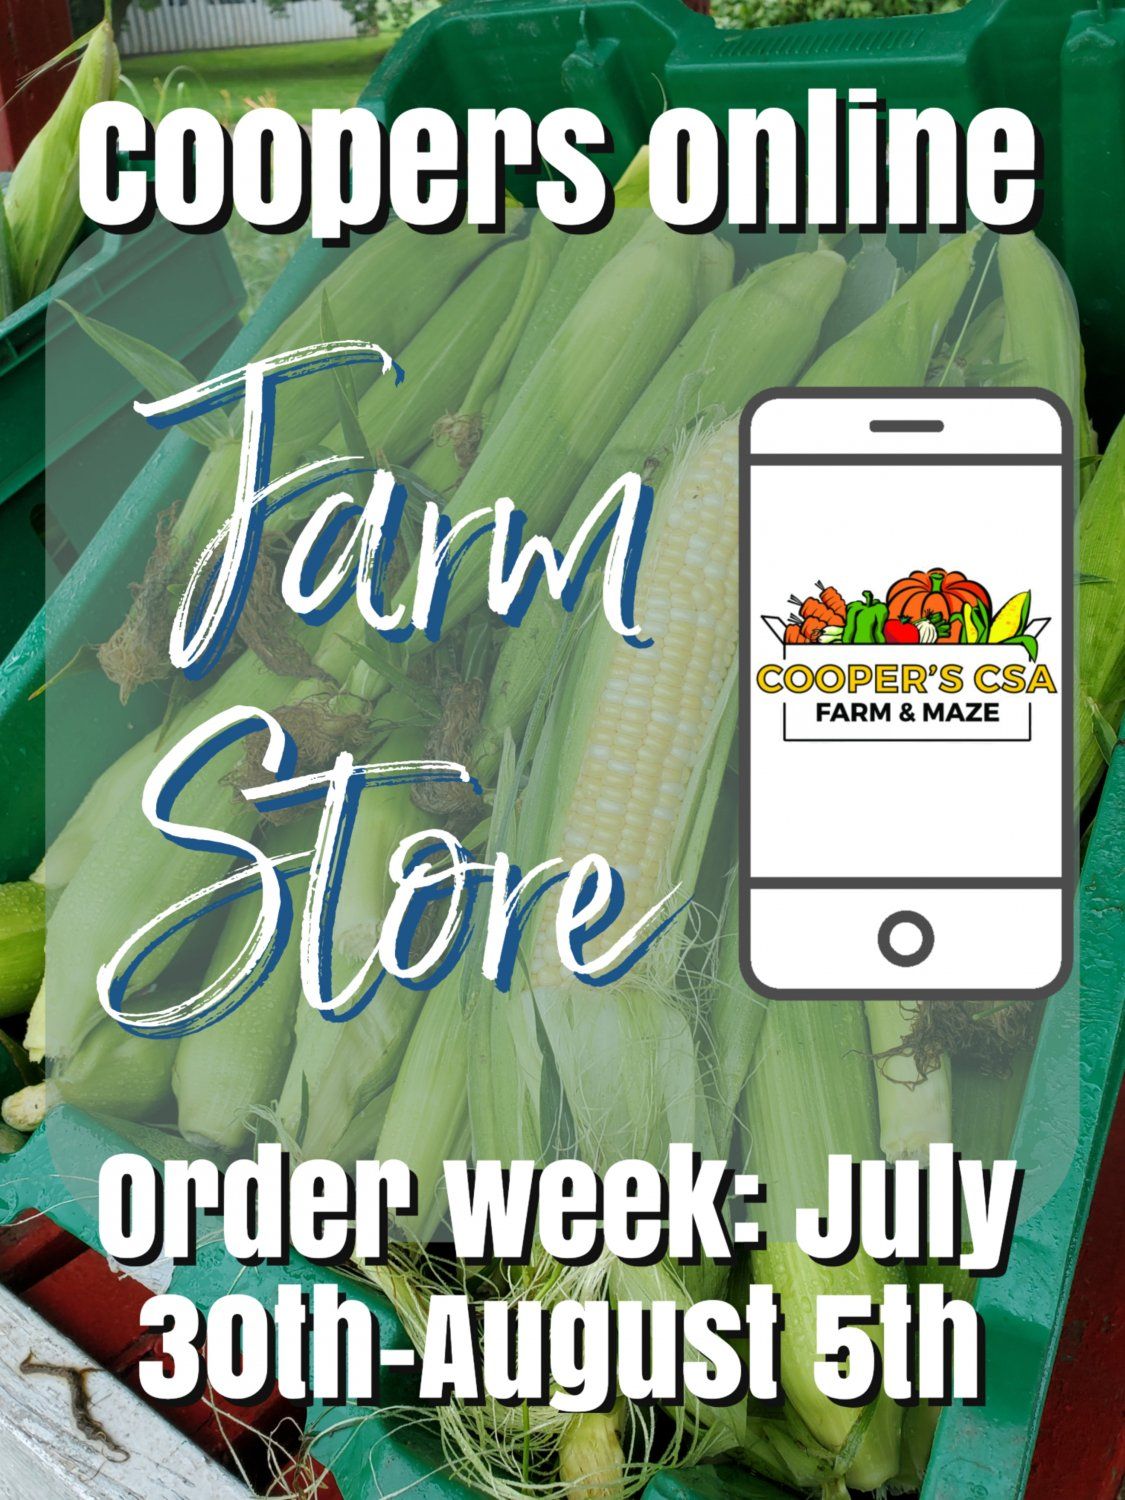 Next Happening: Coopers Online Farm Stand-Order Week July 30th-August 5th